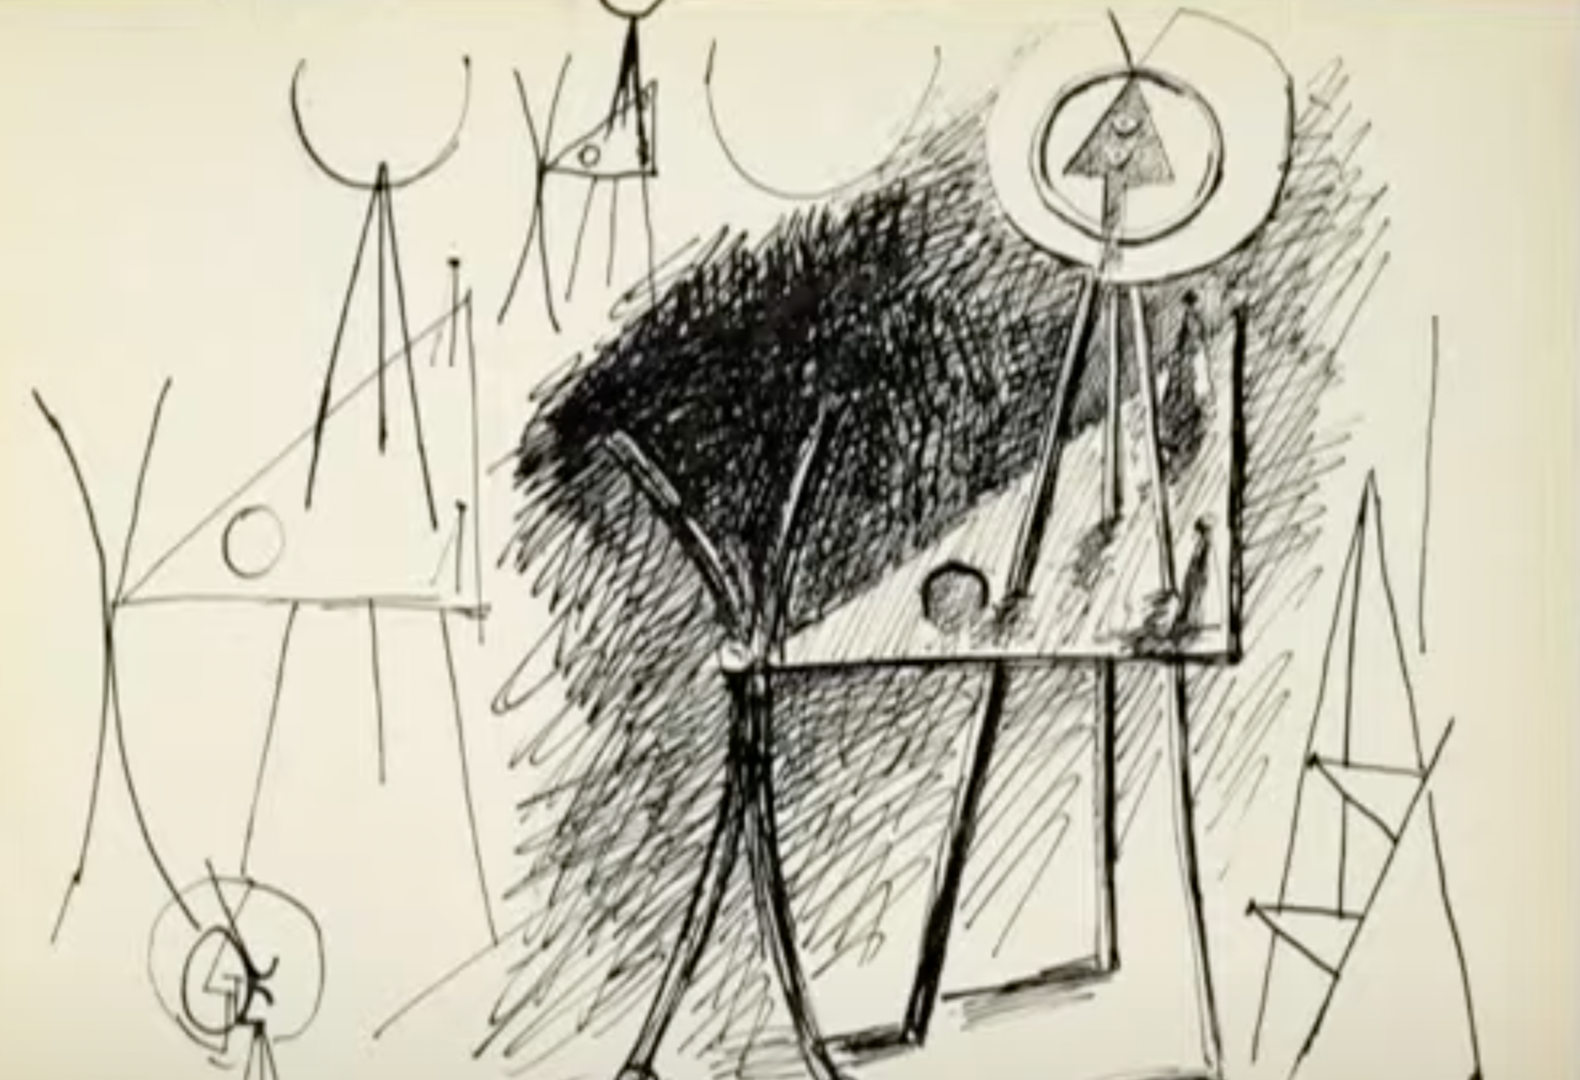 Pencil sketch from Picasso's notebook with many X and triangle shapes